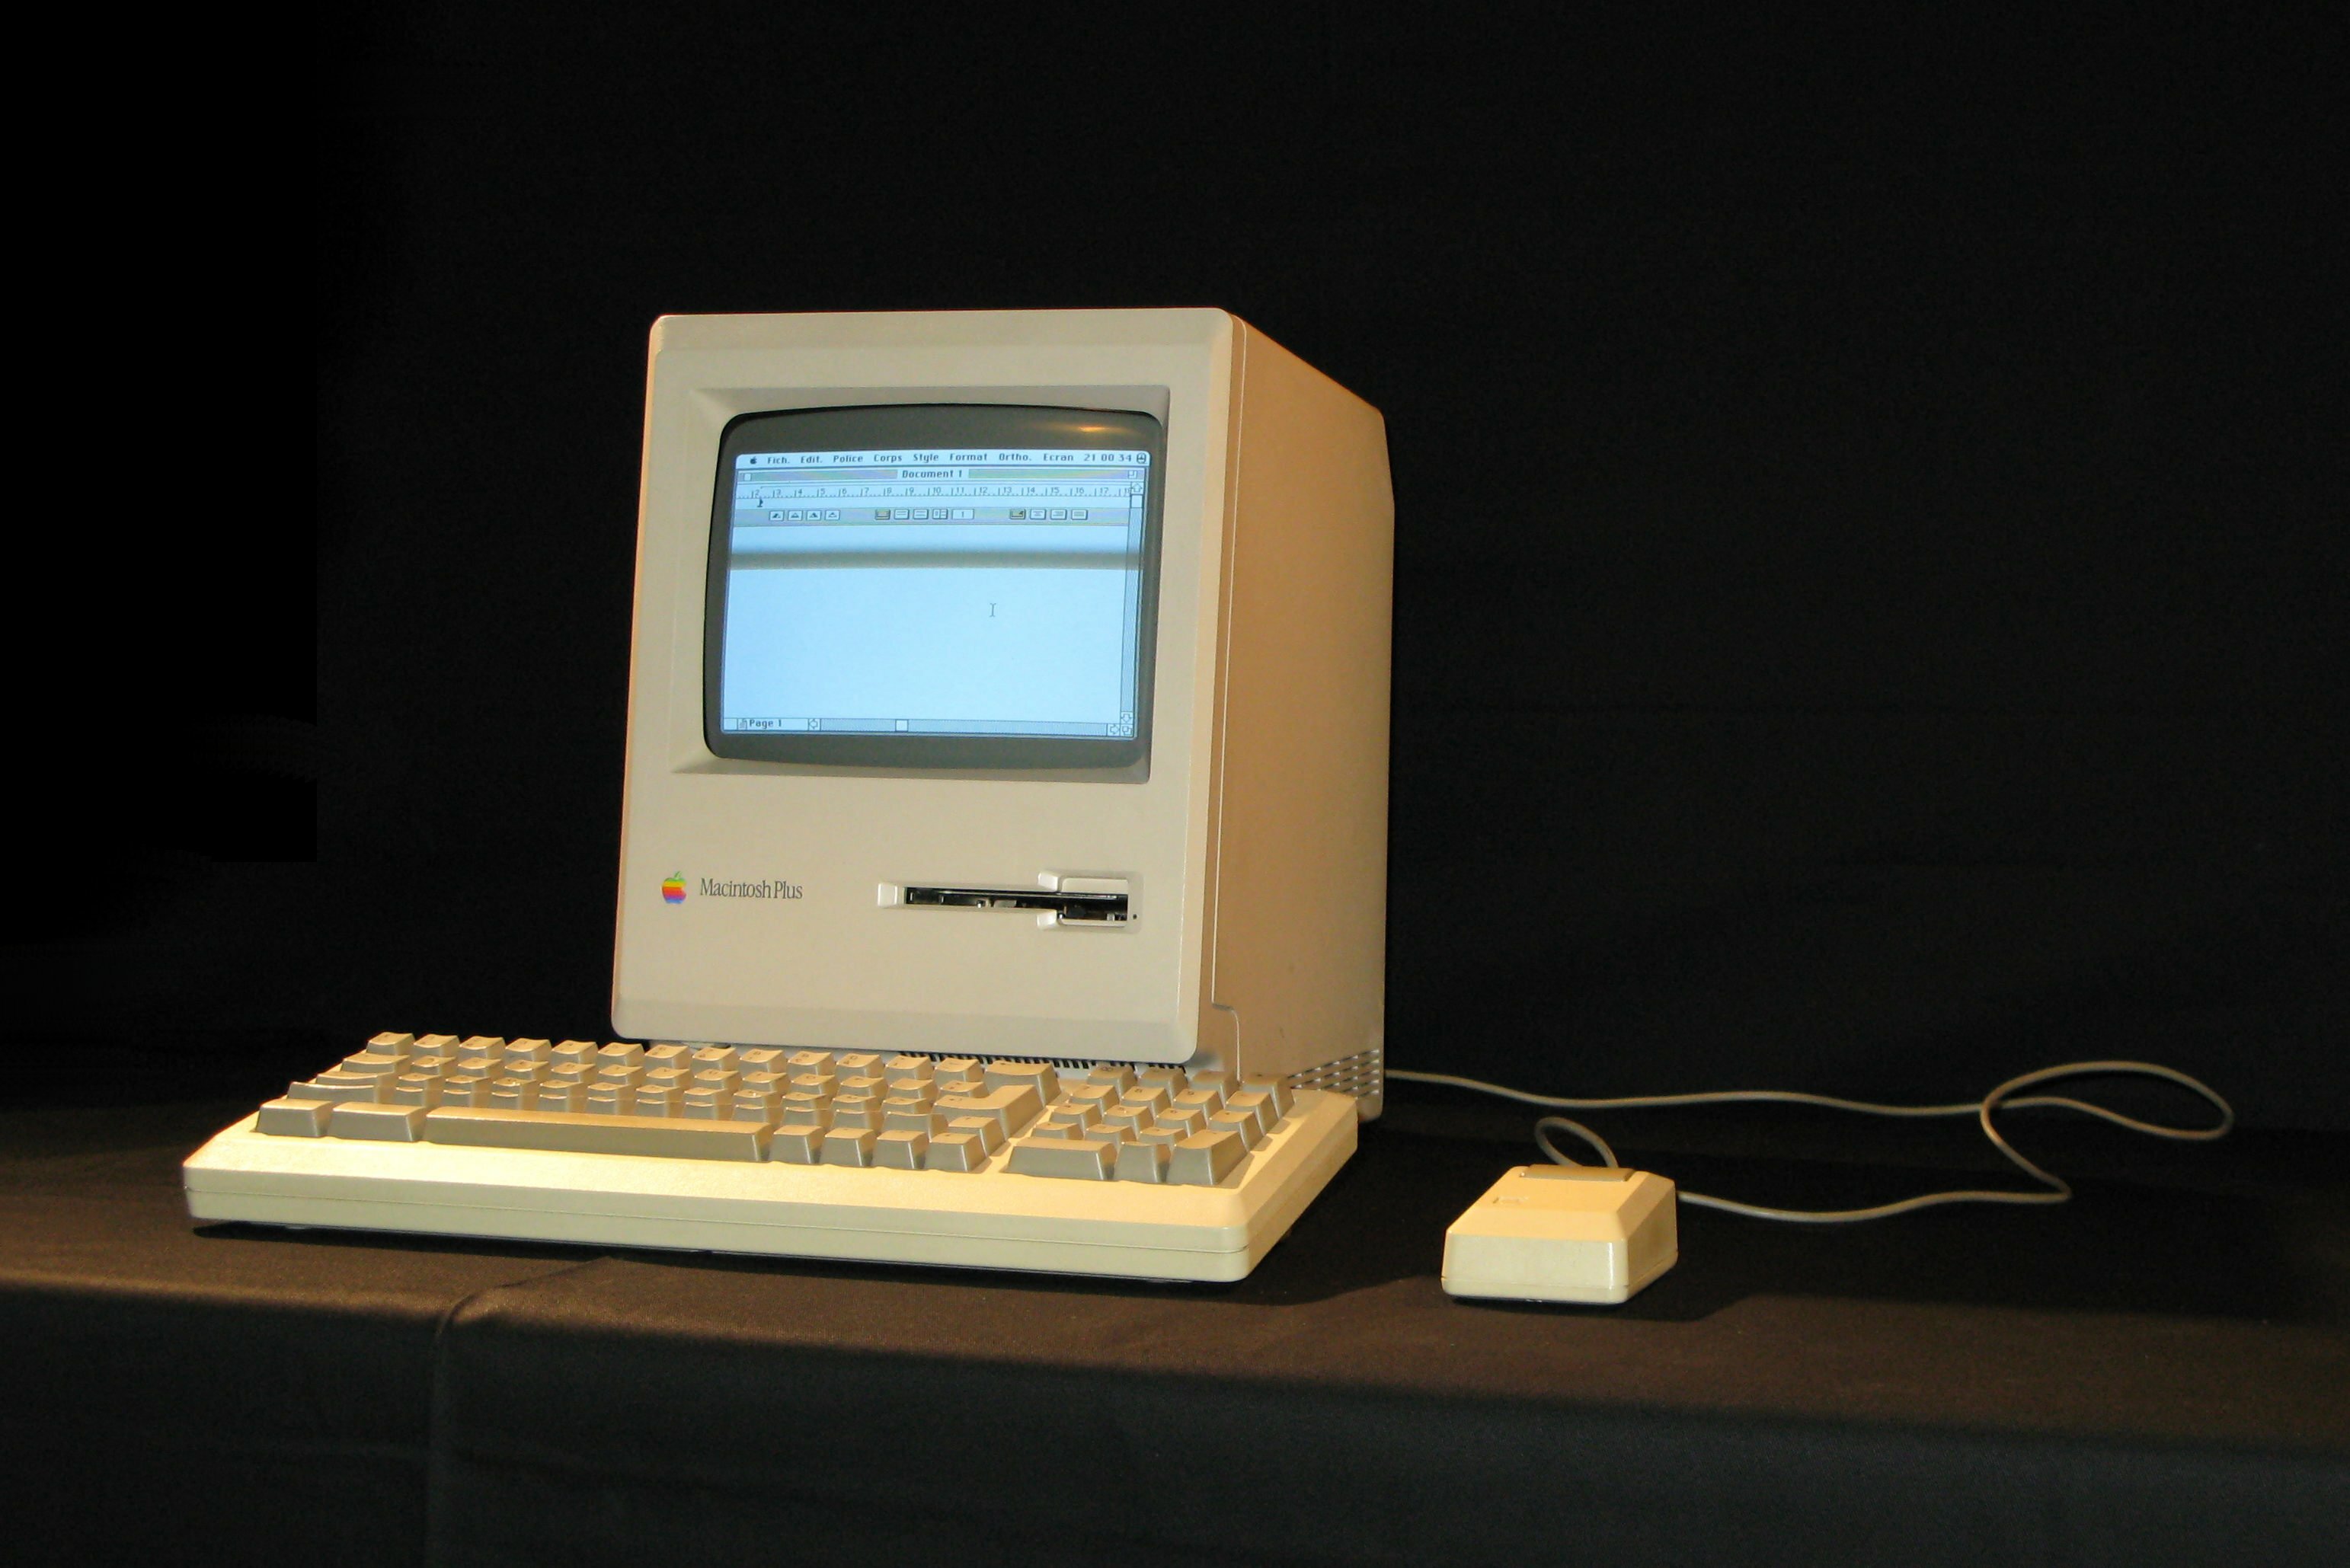 A classic Mac. Image from PC Mag.